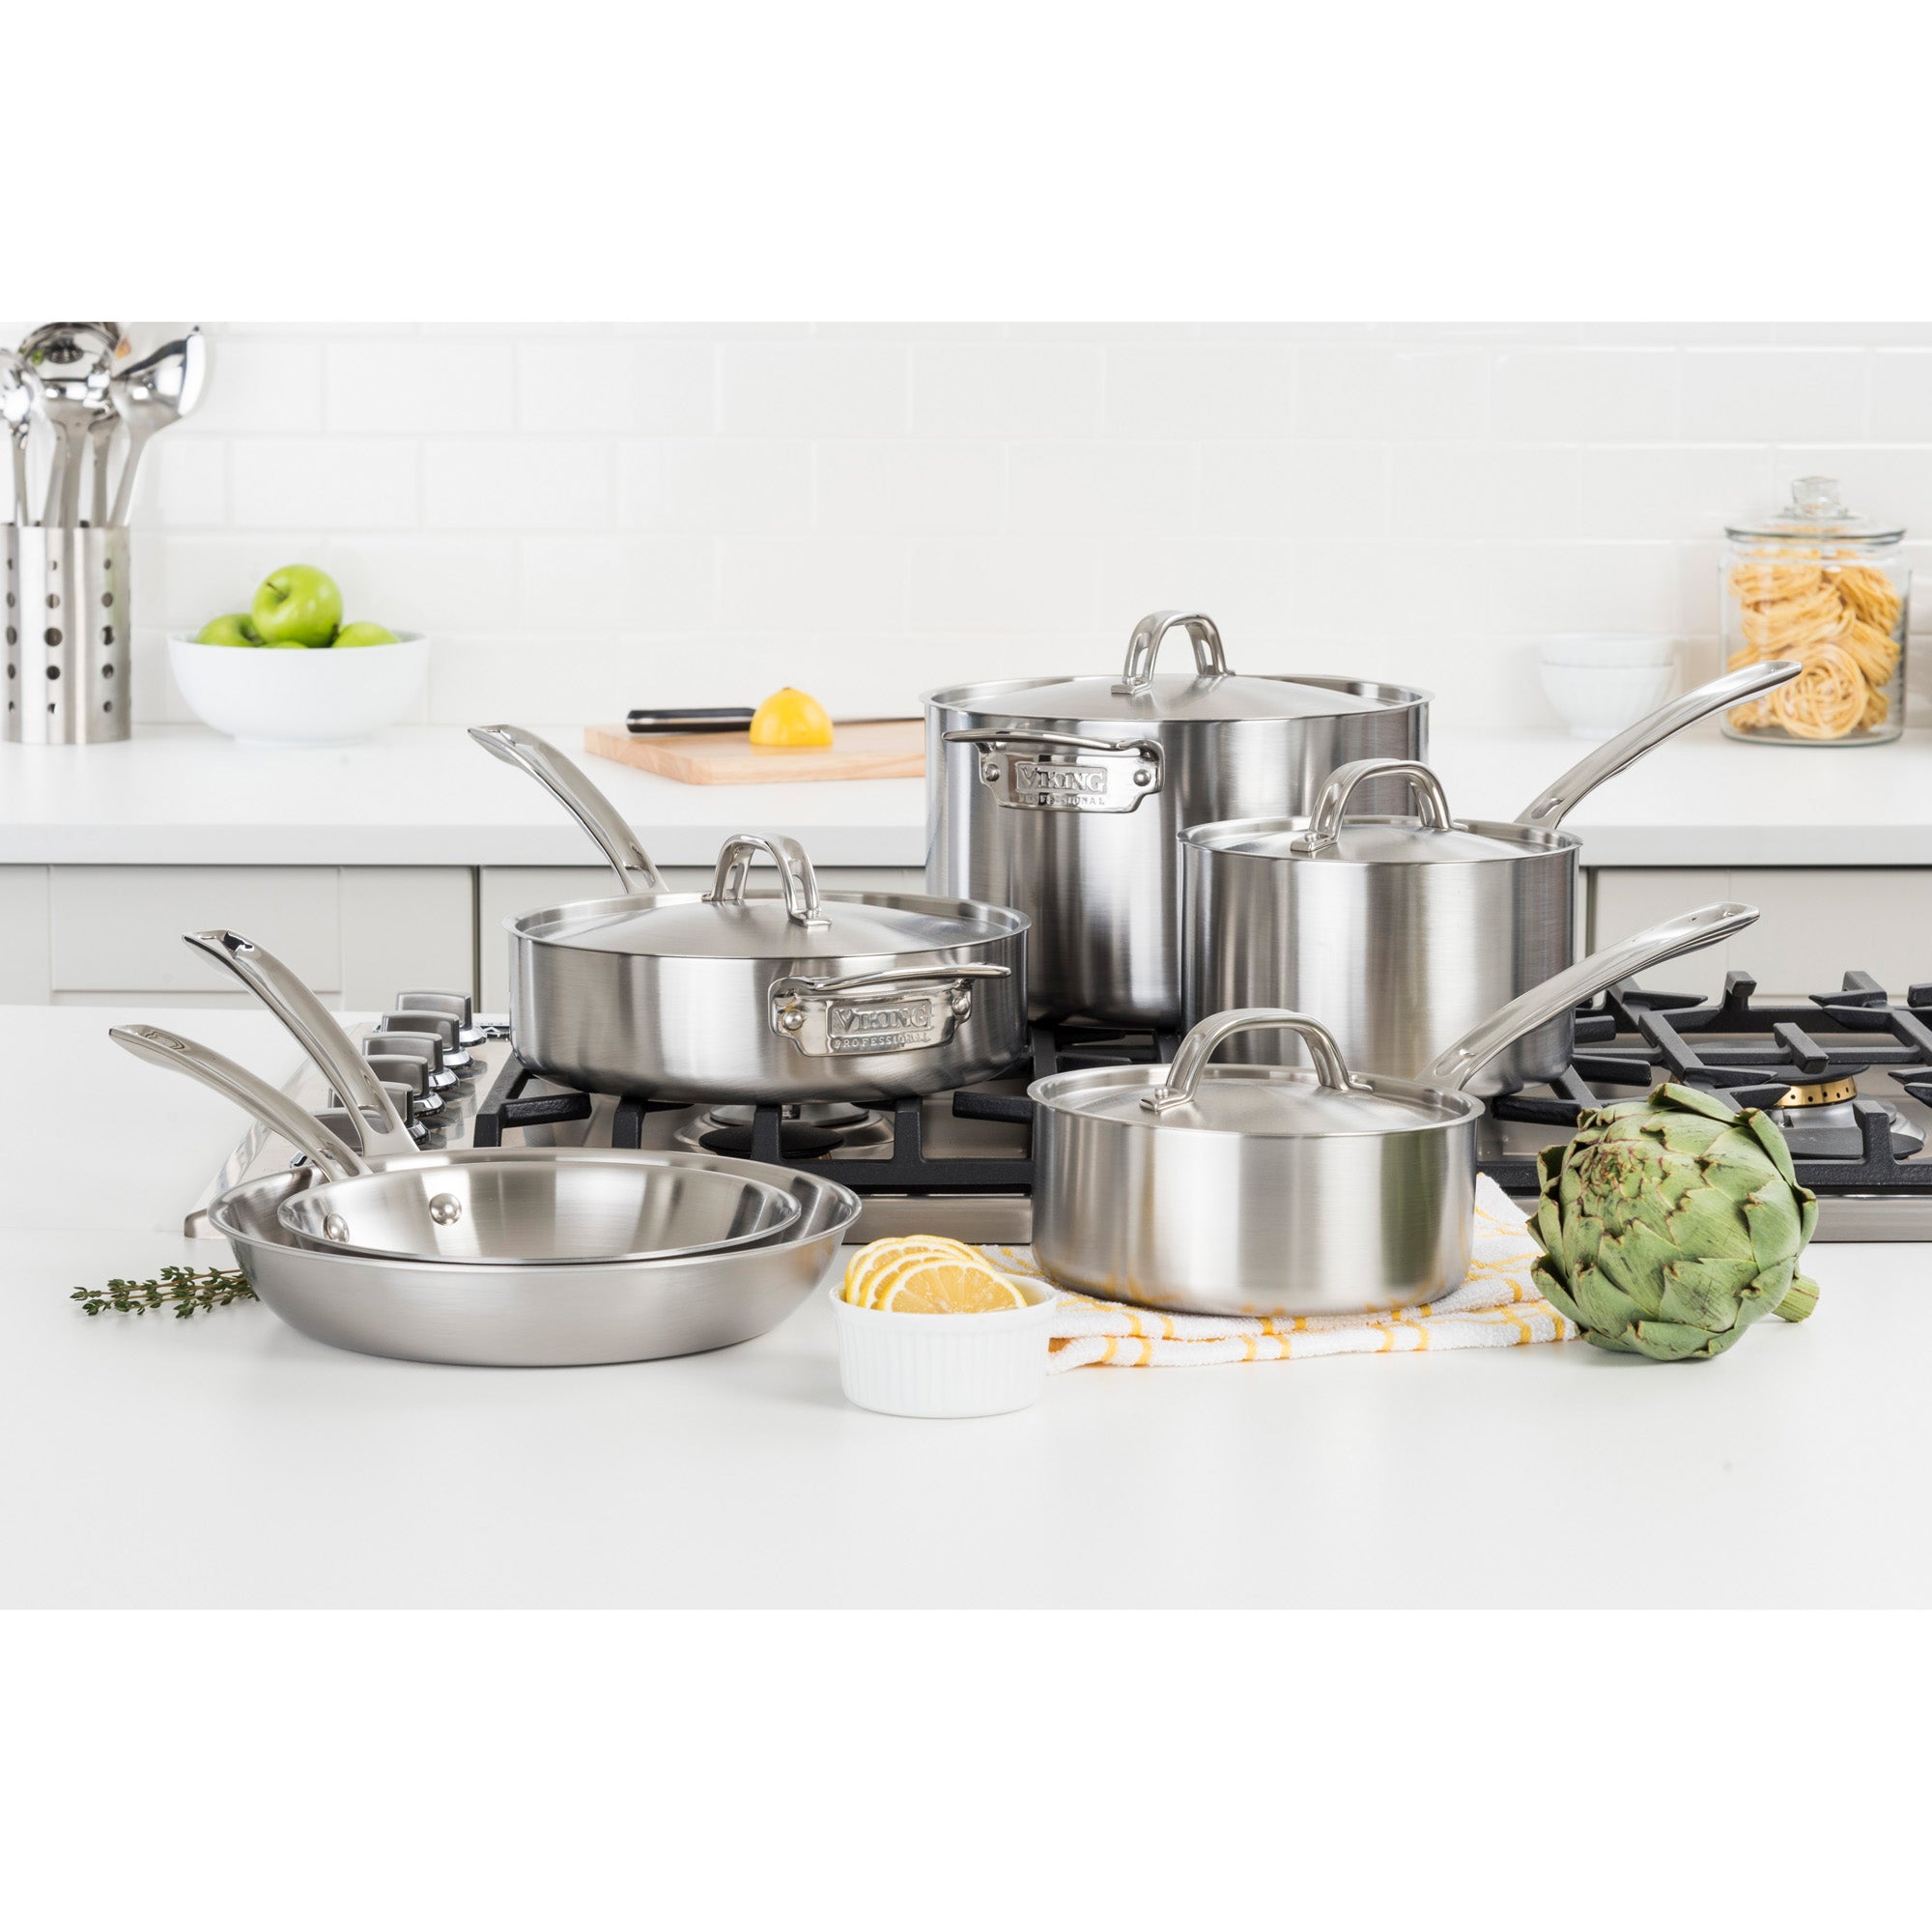 Viking Professional 5-Ply 10-piece Cookware Set – Viking Culinary Products